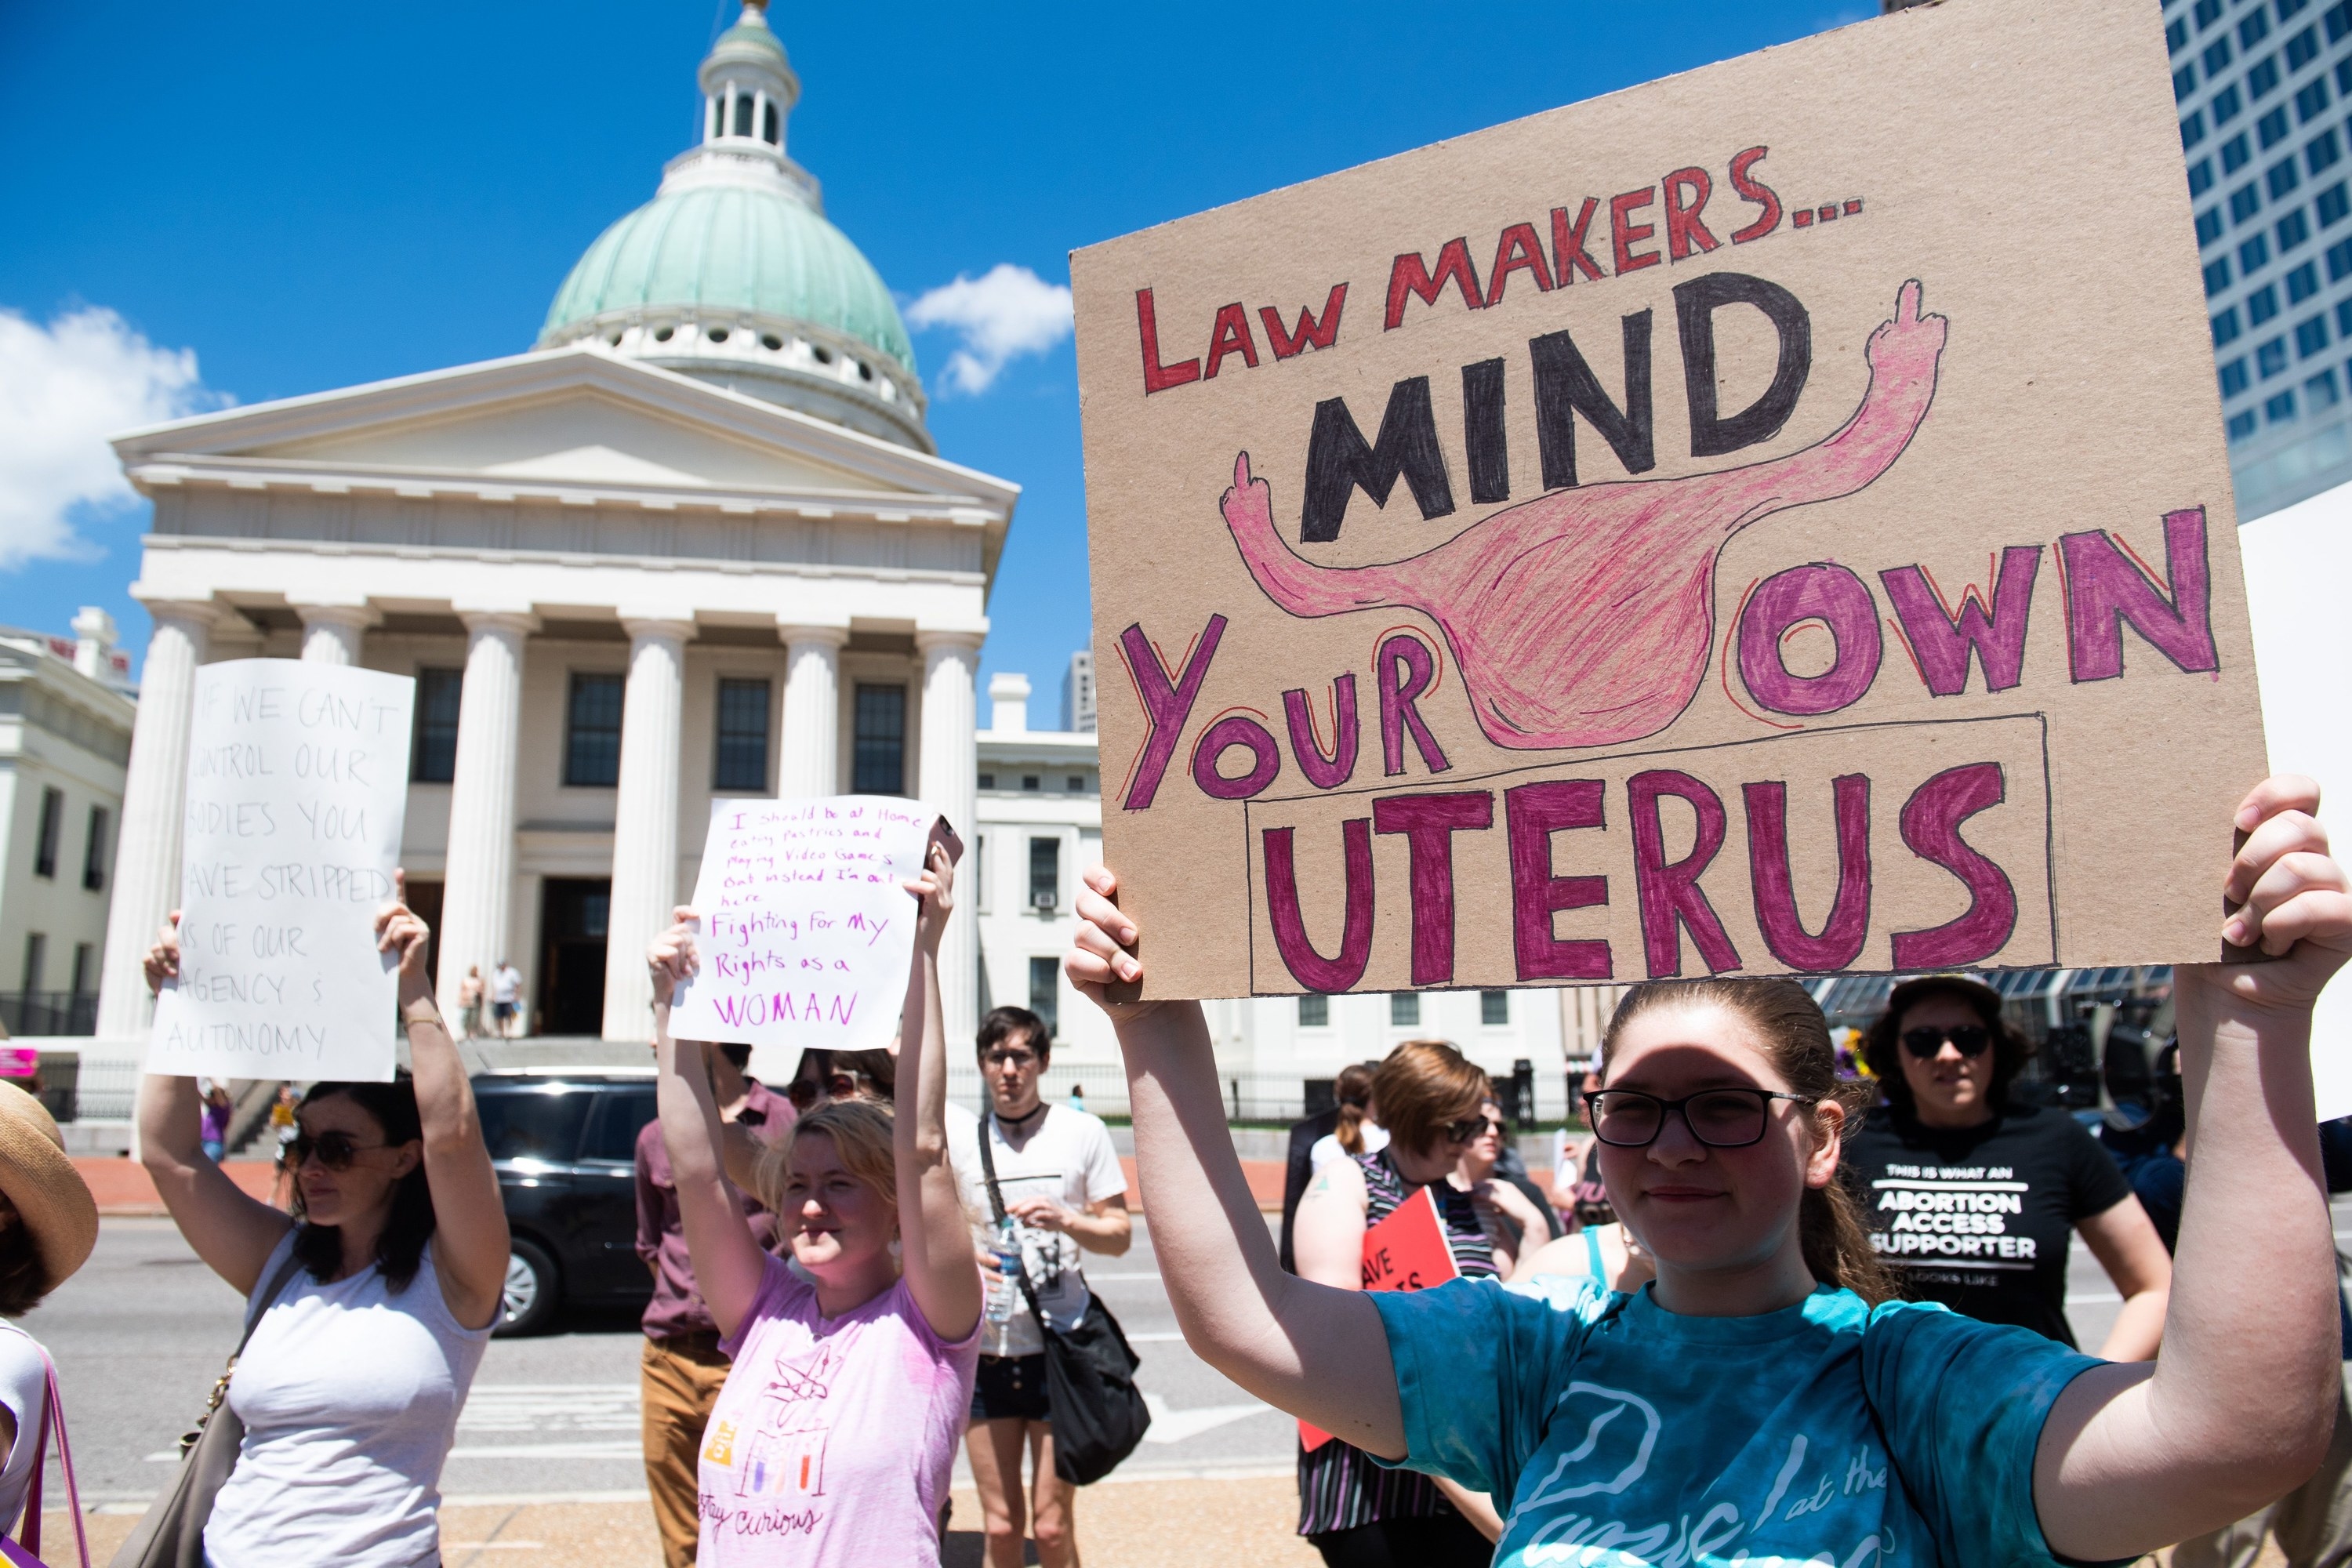 Demonstrators standing in front of a government building hold signs that read &quot;lawmakers, mind your own uterus&quot;